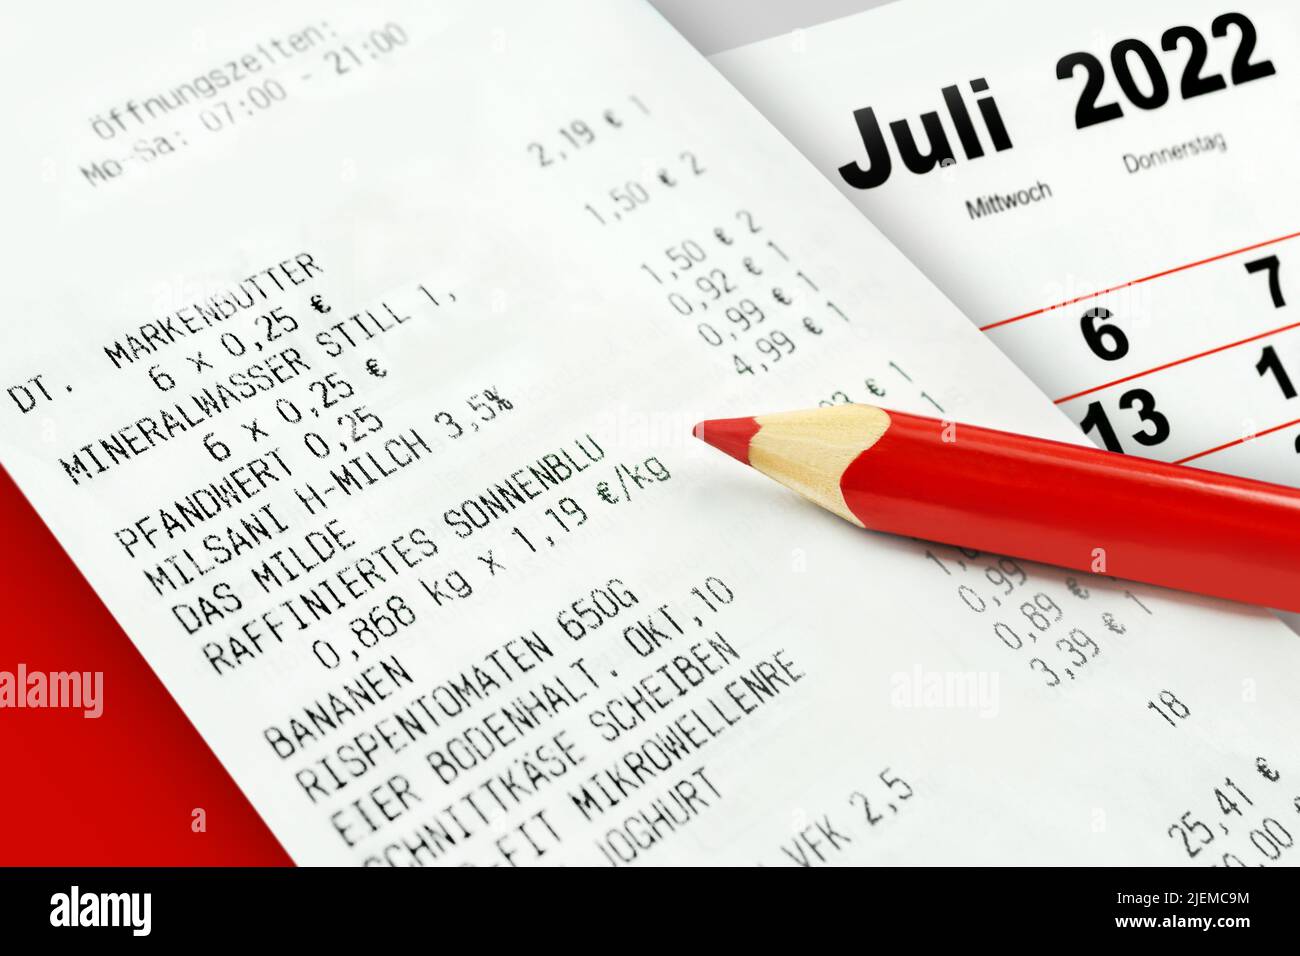 German purchase voucher staple foods with calendar 2022 July and red pencil Stock Photo